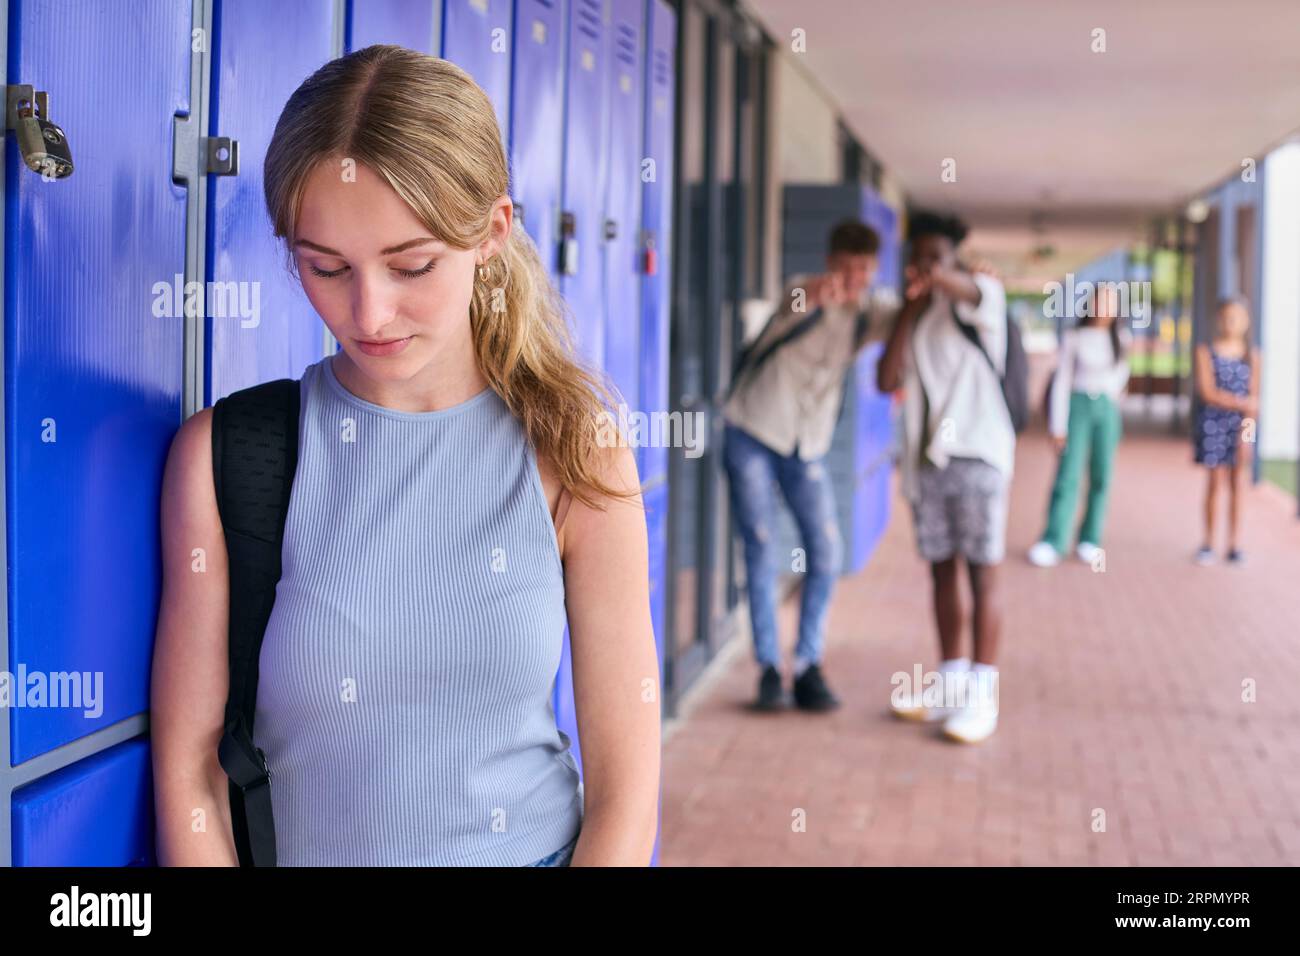 Unhappy Teenage Girl Outdoors At High School Being Teased Or Bullied Stock Photo